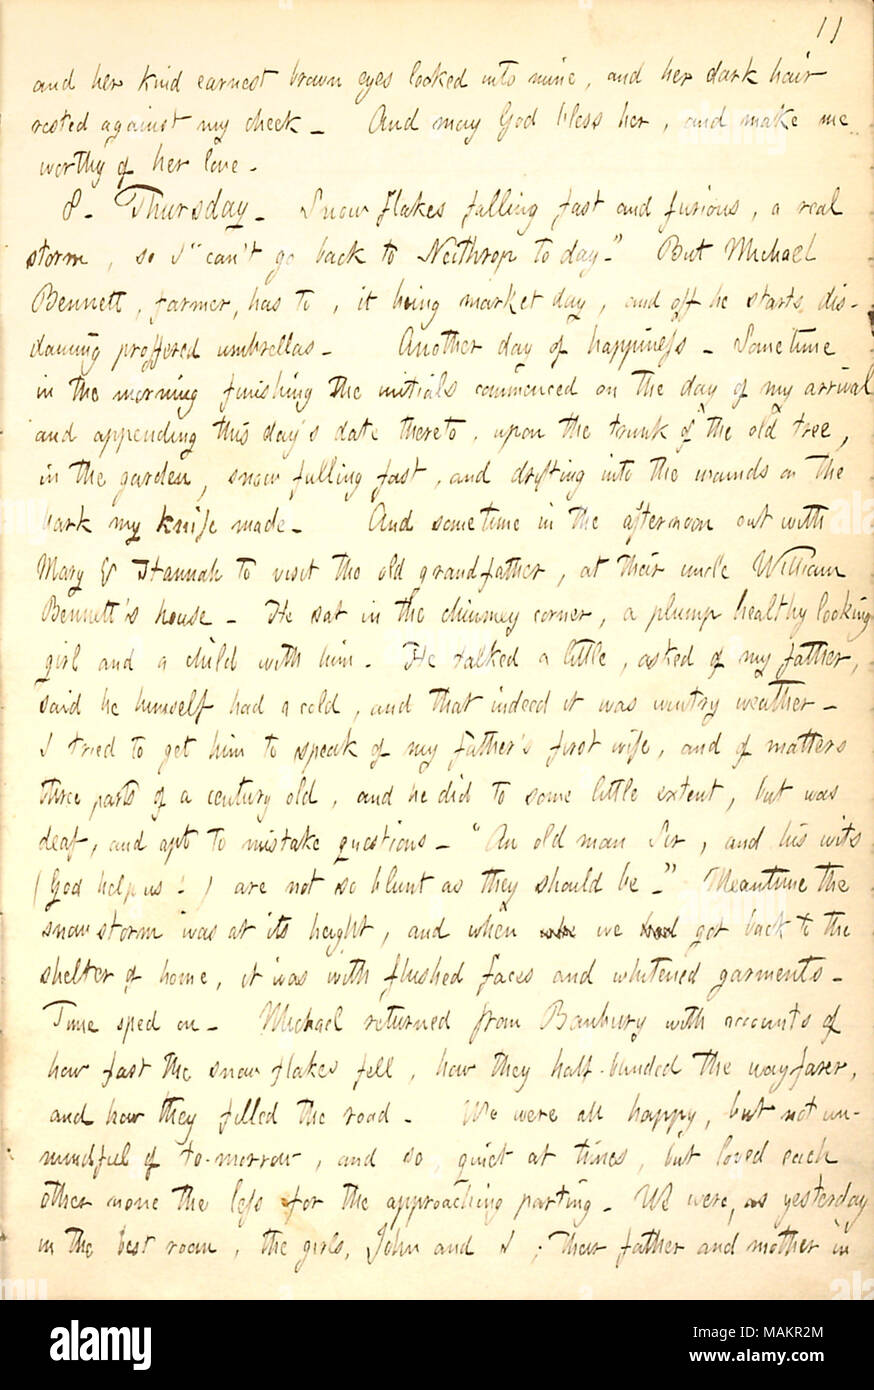 Describes a visit to the Bennett family at Chacombe.  Transcription: and her [Hannah Bennett ?s] kind earnest brown eyes looked into mine, and her dark hair rested against my cheek. And may God bless her, and make me worthy of her love. 8. Thursday. Snow flakes falling fast and furious, a real storm, so I ?ǣcan ?t go back to Neithrop to day. ? But Michael Bennett, farmer, has to, it being market day, and off he starts disdaning proffered umbrellas. Another day of happiness. Sometime in the morning finishing the initials commenced on the day of my arrival and appending this day ?s date thereto, Stock Photo